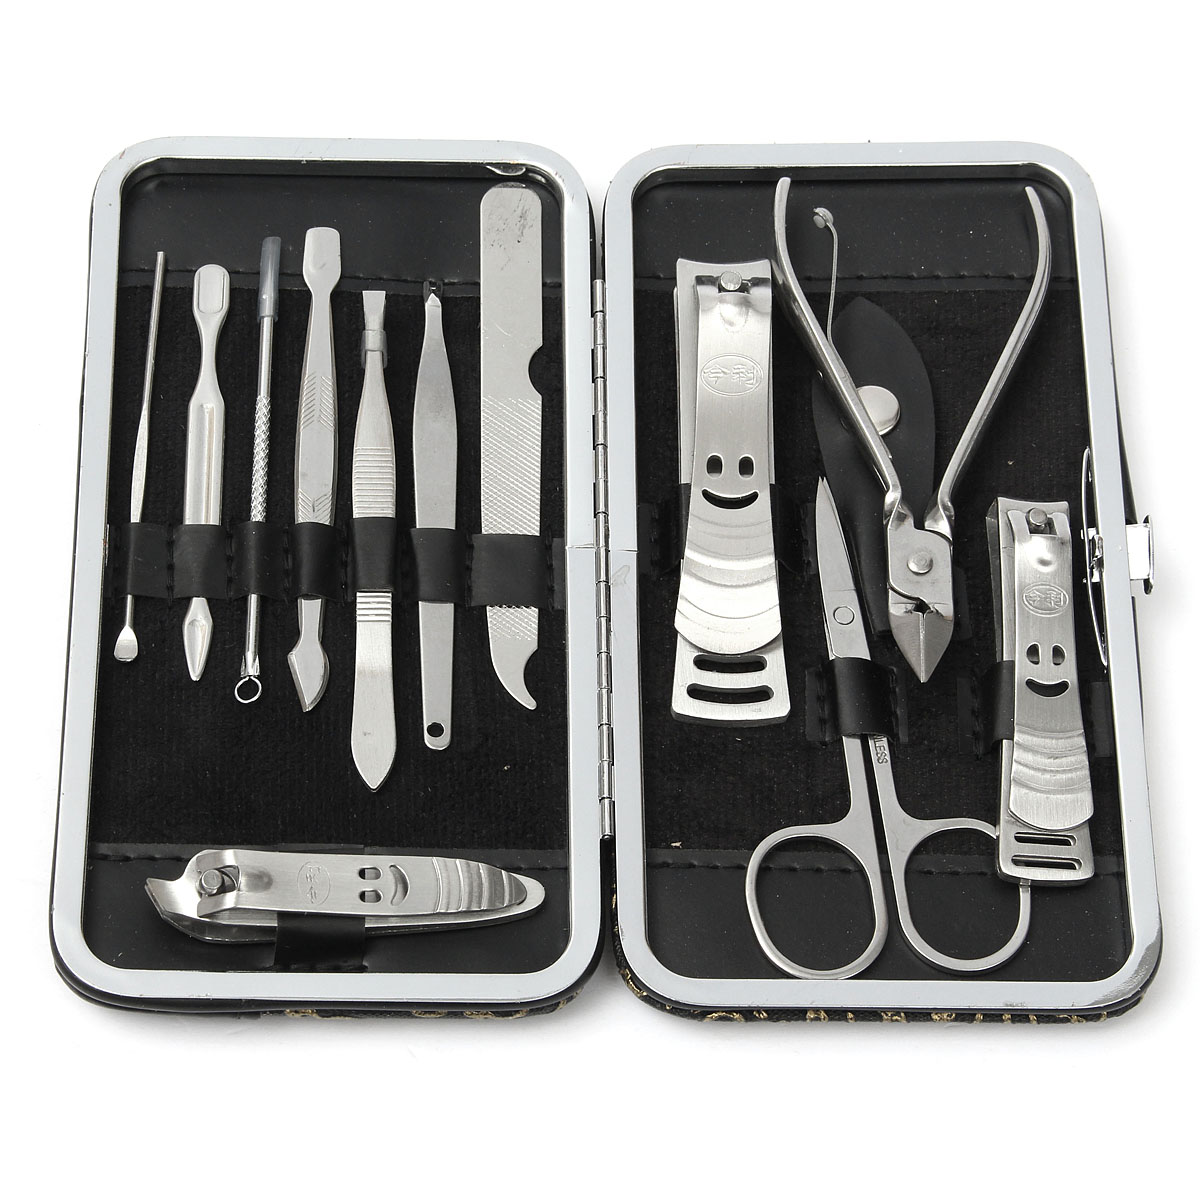 12pcs-Nail-Care-Cutter-Kit-Set-Cuticle-Clippers-Pedicure-Manicure-Tool-with-Case-1036650